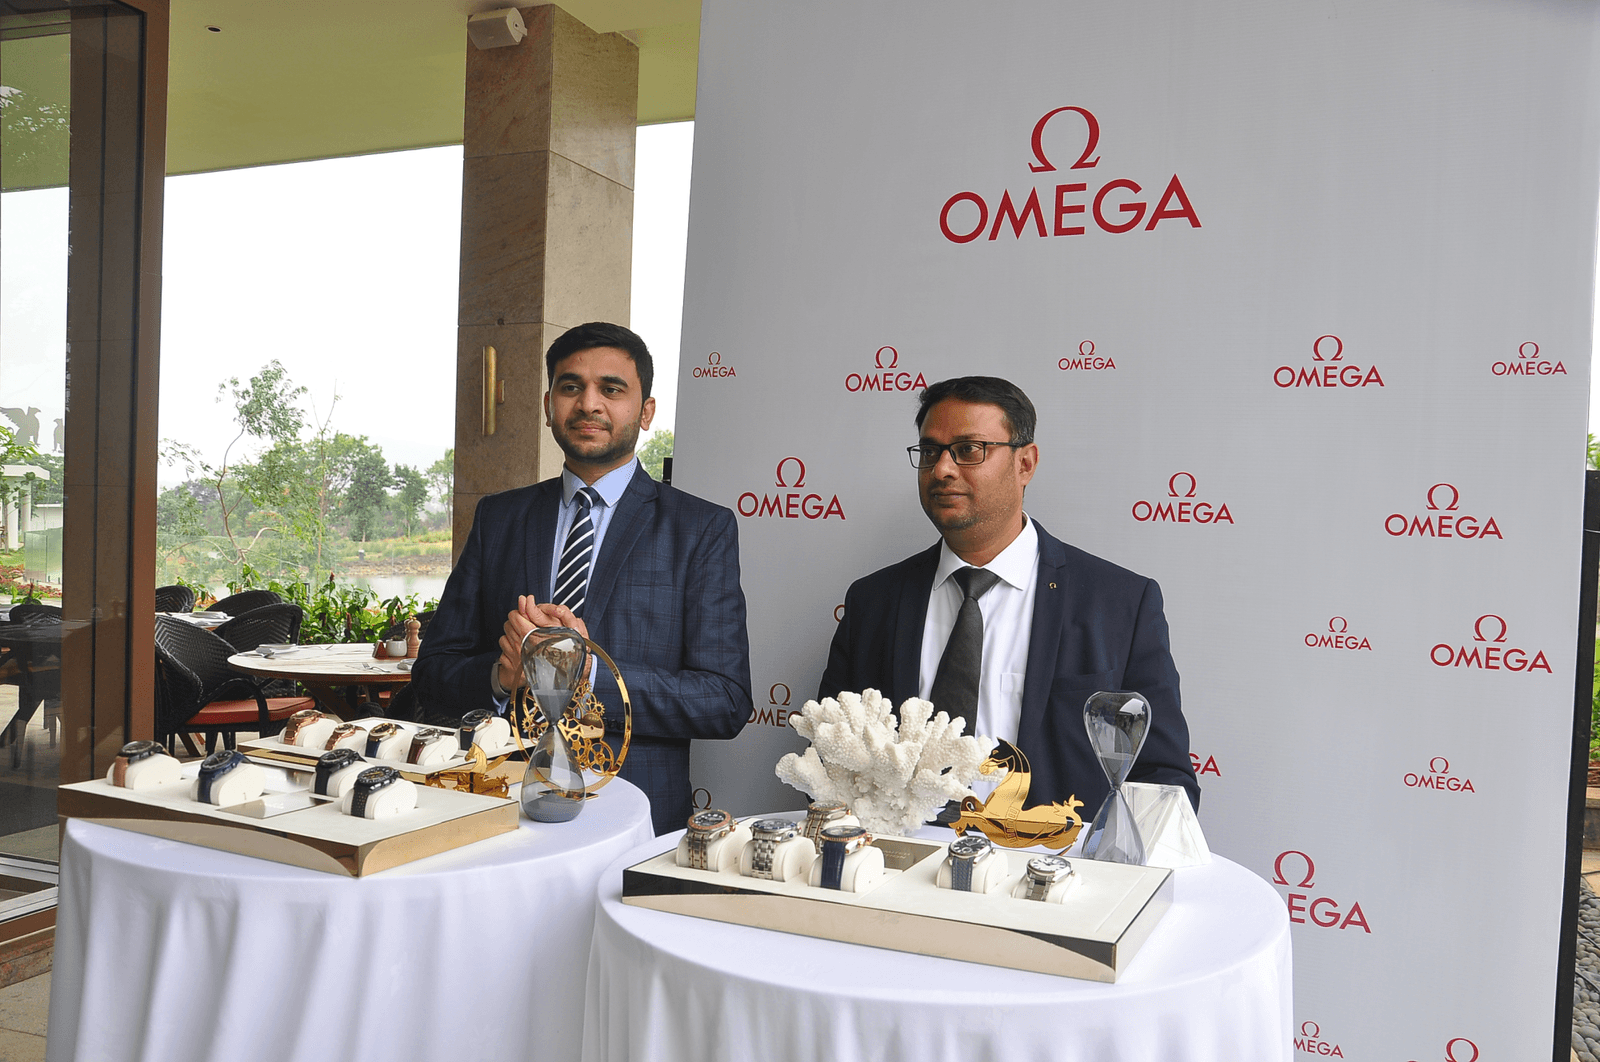 OMEGA's renown extends beyond golf to a variety of sports all around the world. 